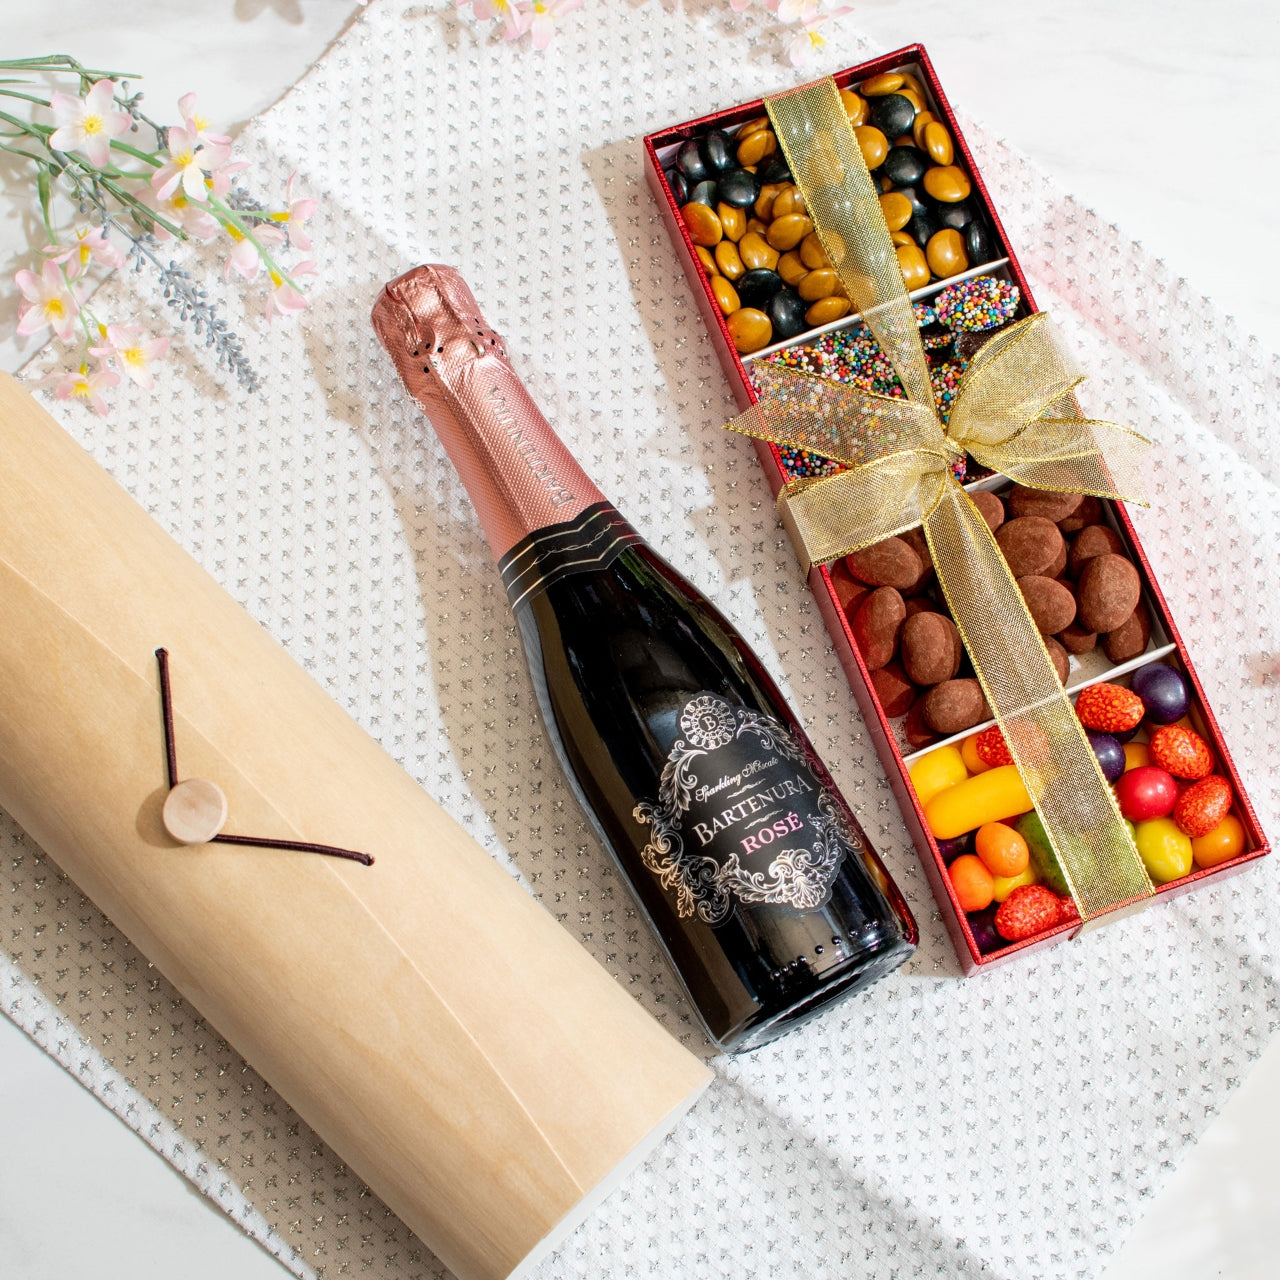 Purim Mishloach Manot & Sparkling Wine Gift Set with Wood Wine Case